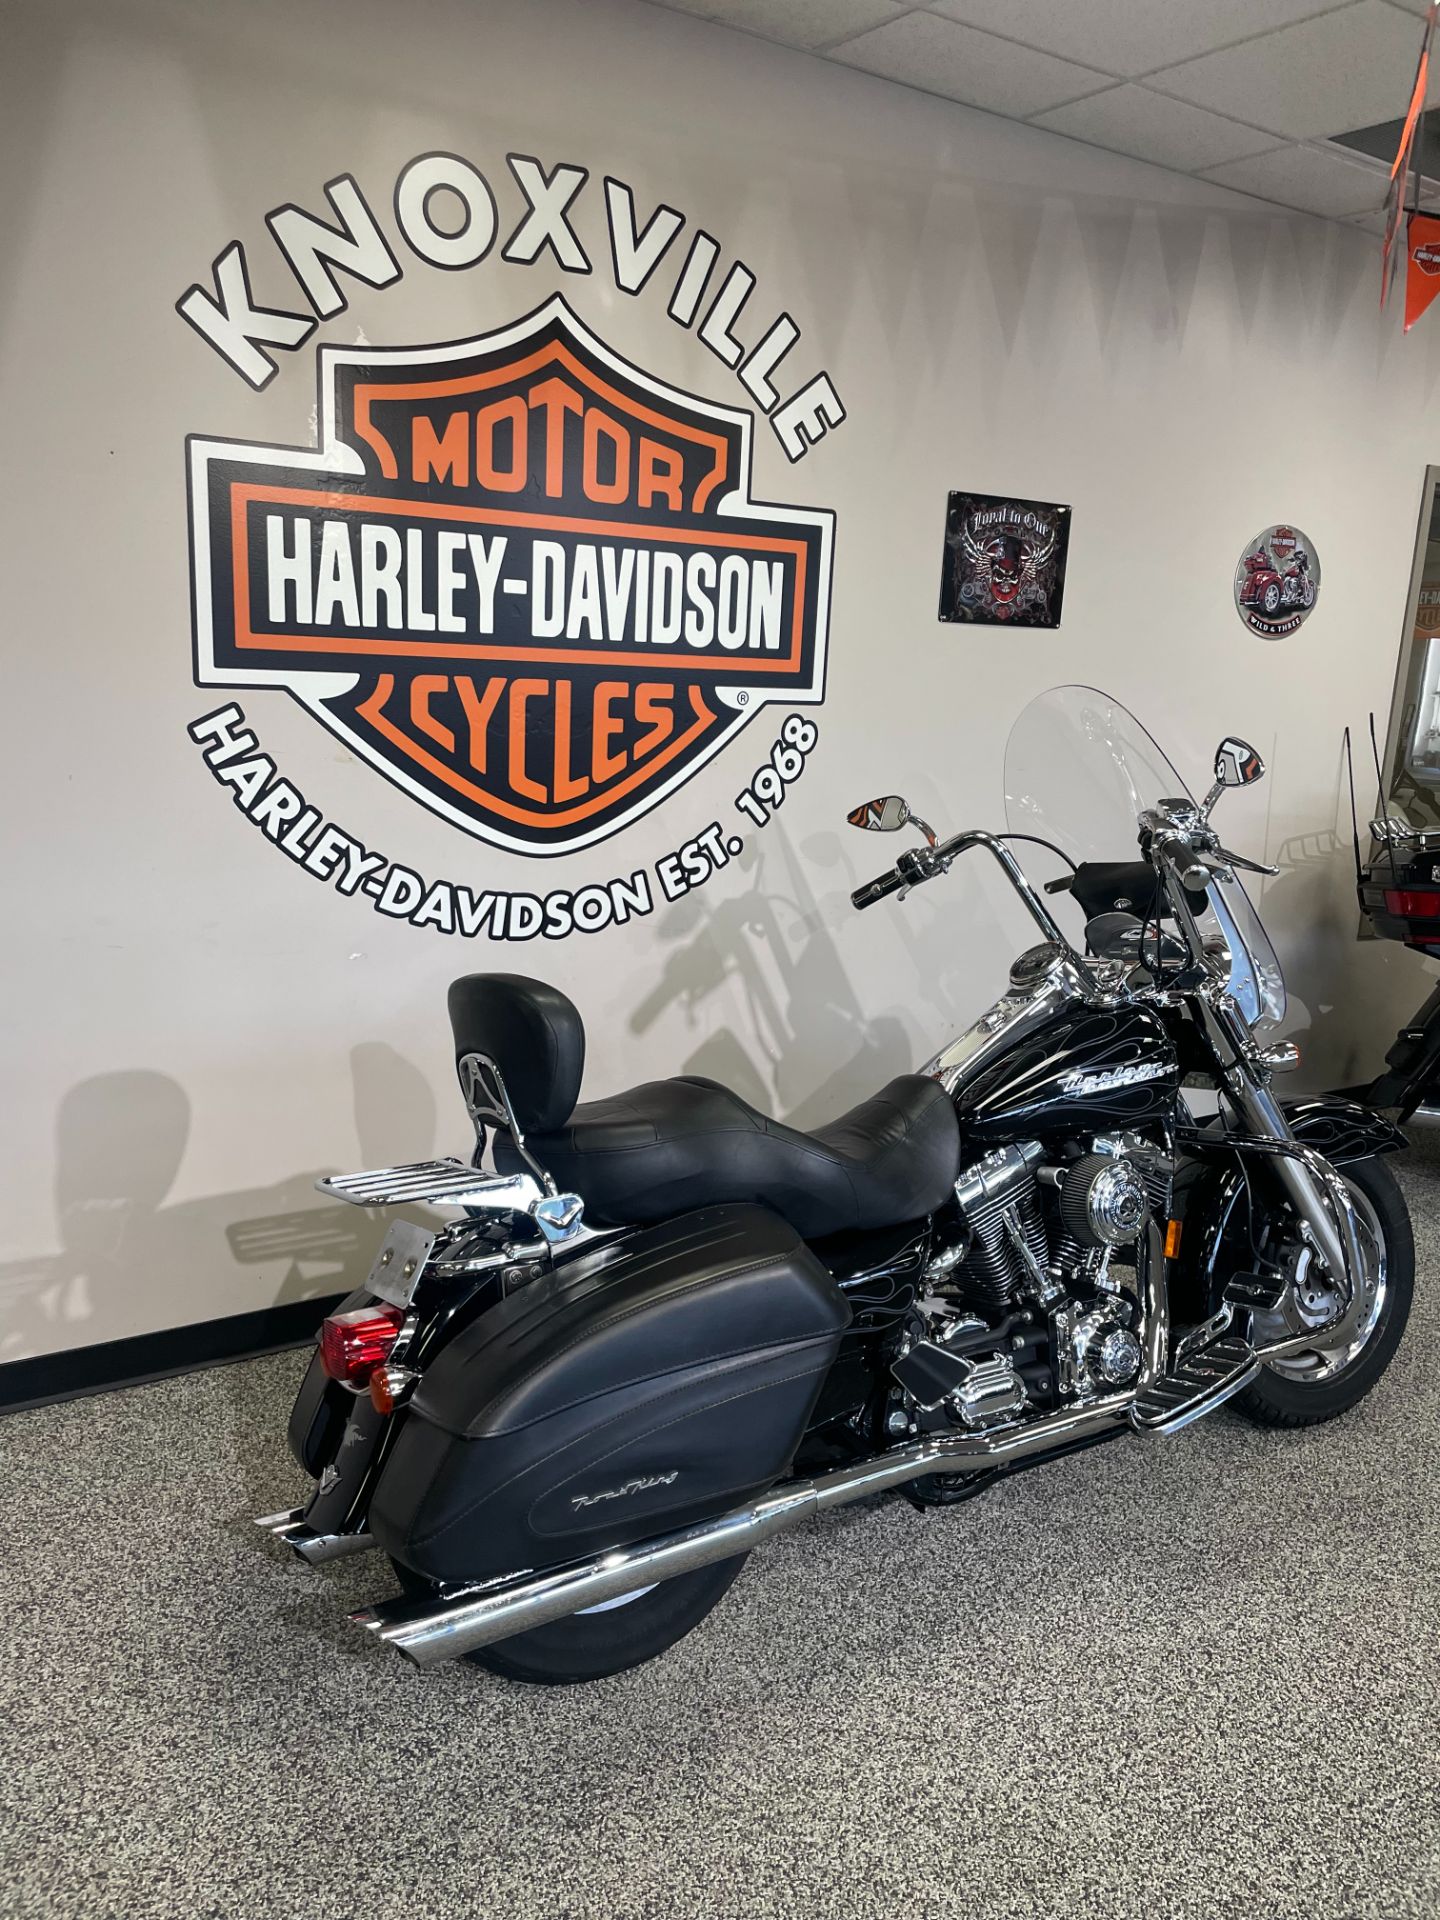 2005 Harley-Davidson ROAD KING CUSTOM in Knoxville, Tennessee - Photo 4